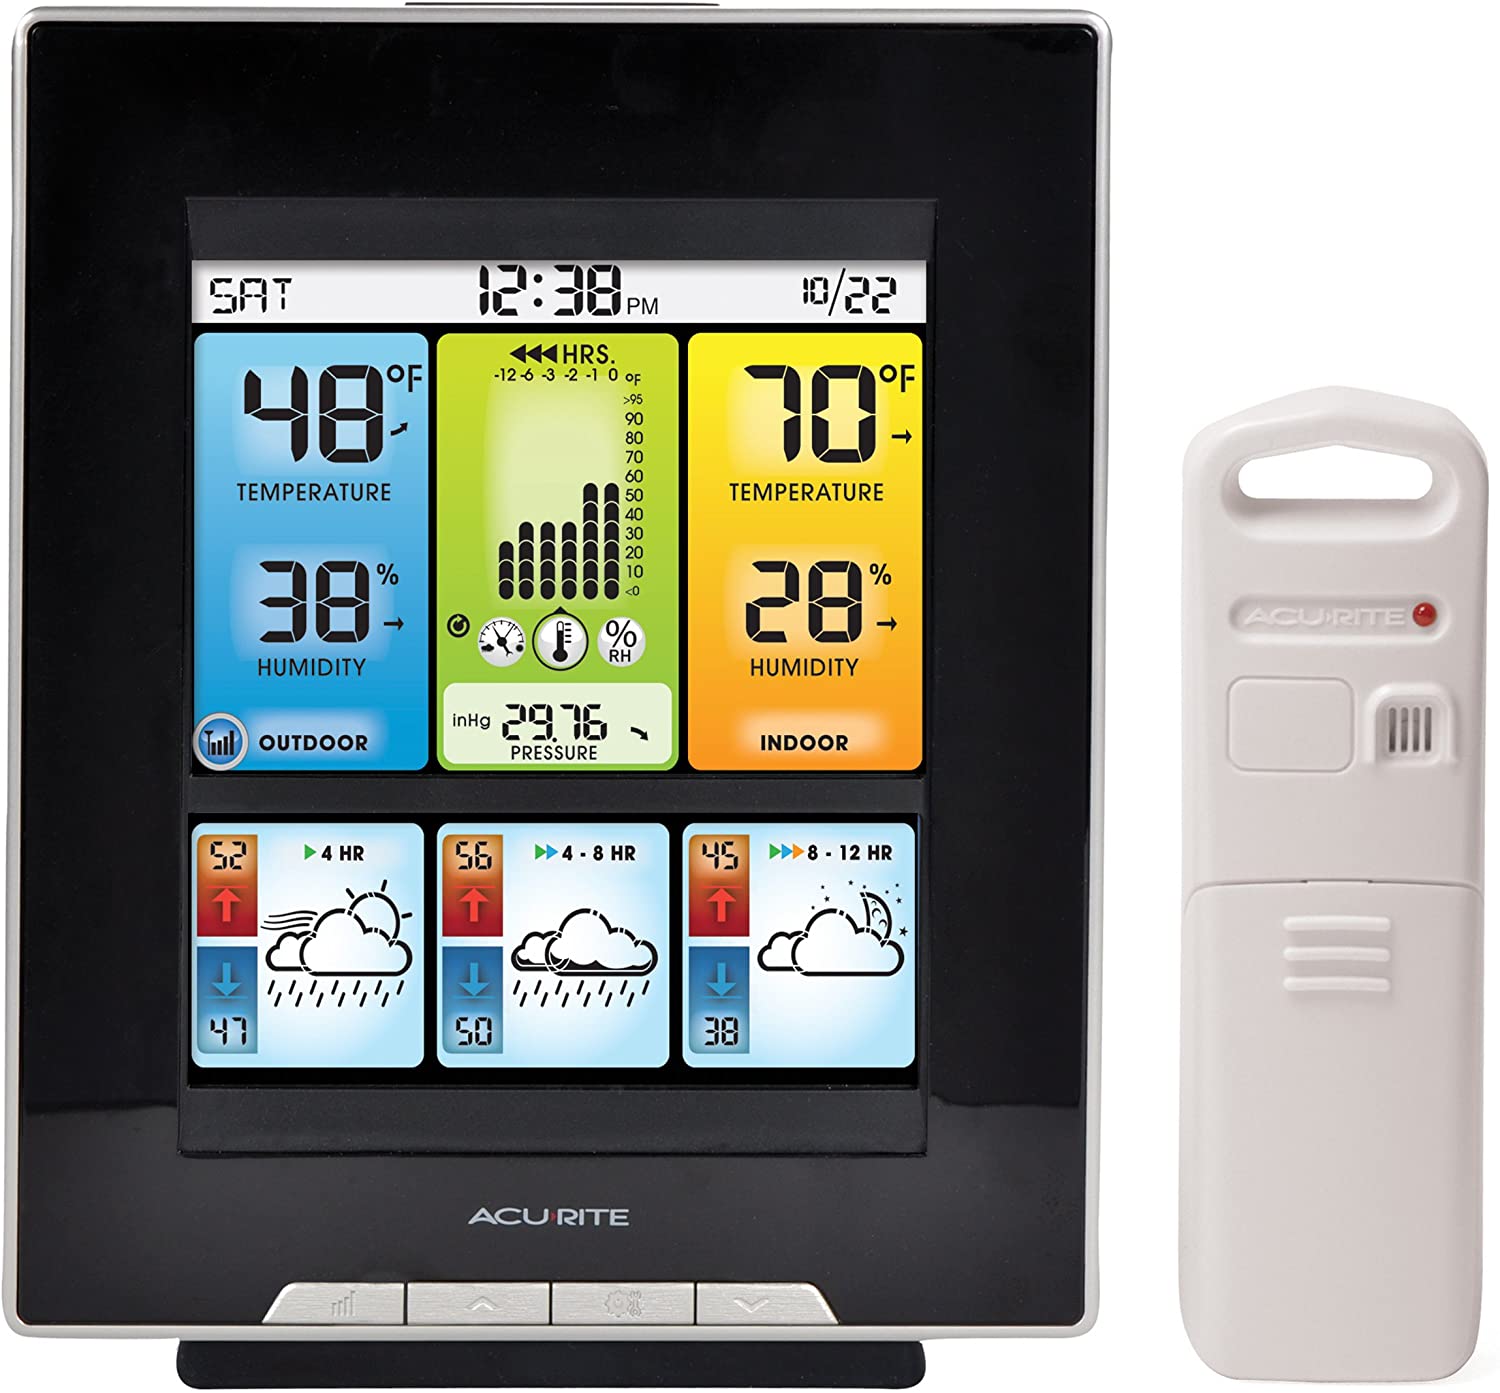 AcuRite 02007 Digital Home Weather Station with Morning Noon and Night Precision Forecast, Temperature and Humidity Gauge